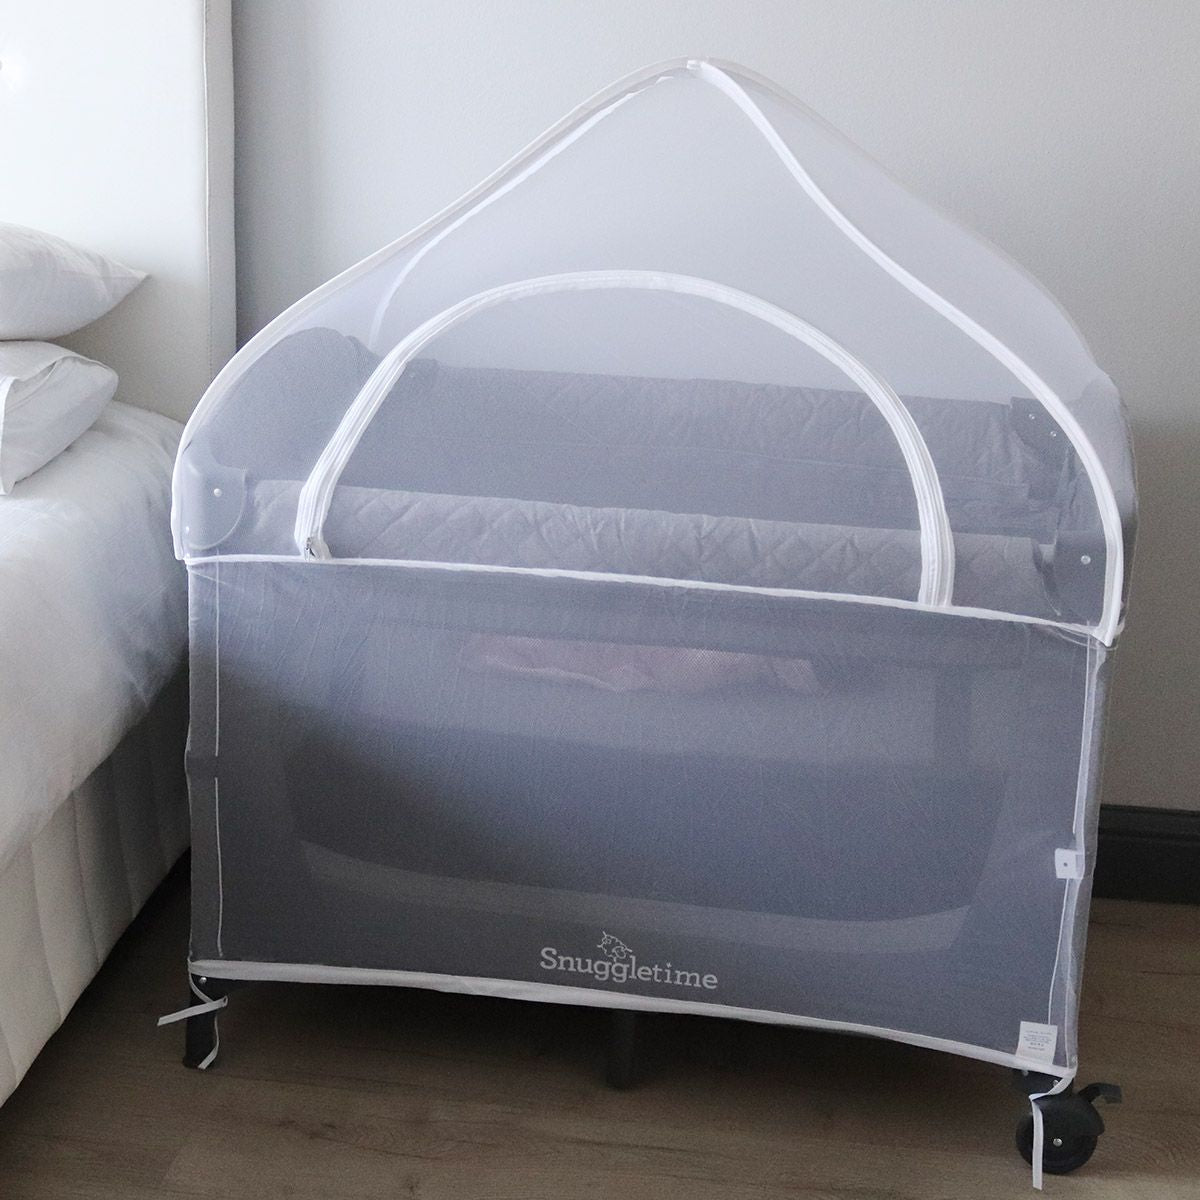 Dome Mozi Net Camp Cot